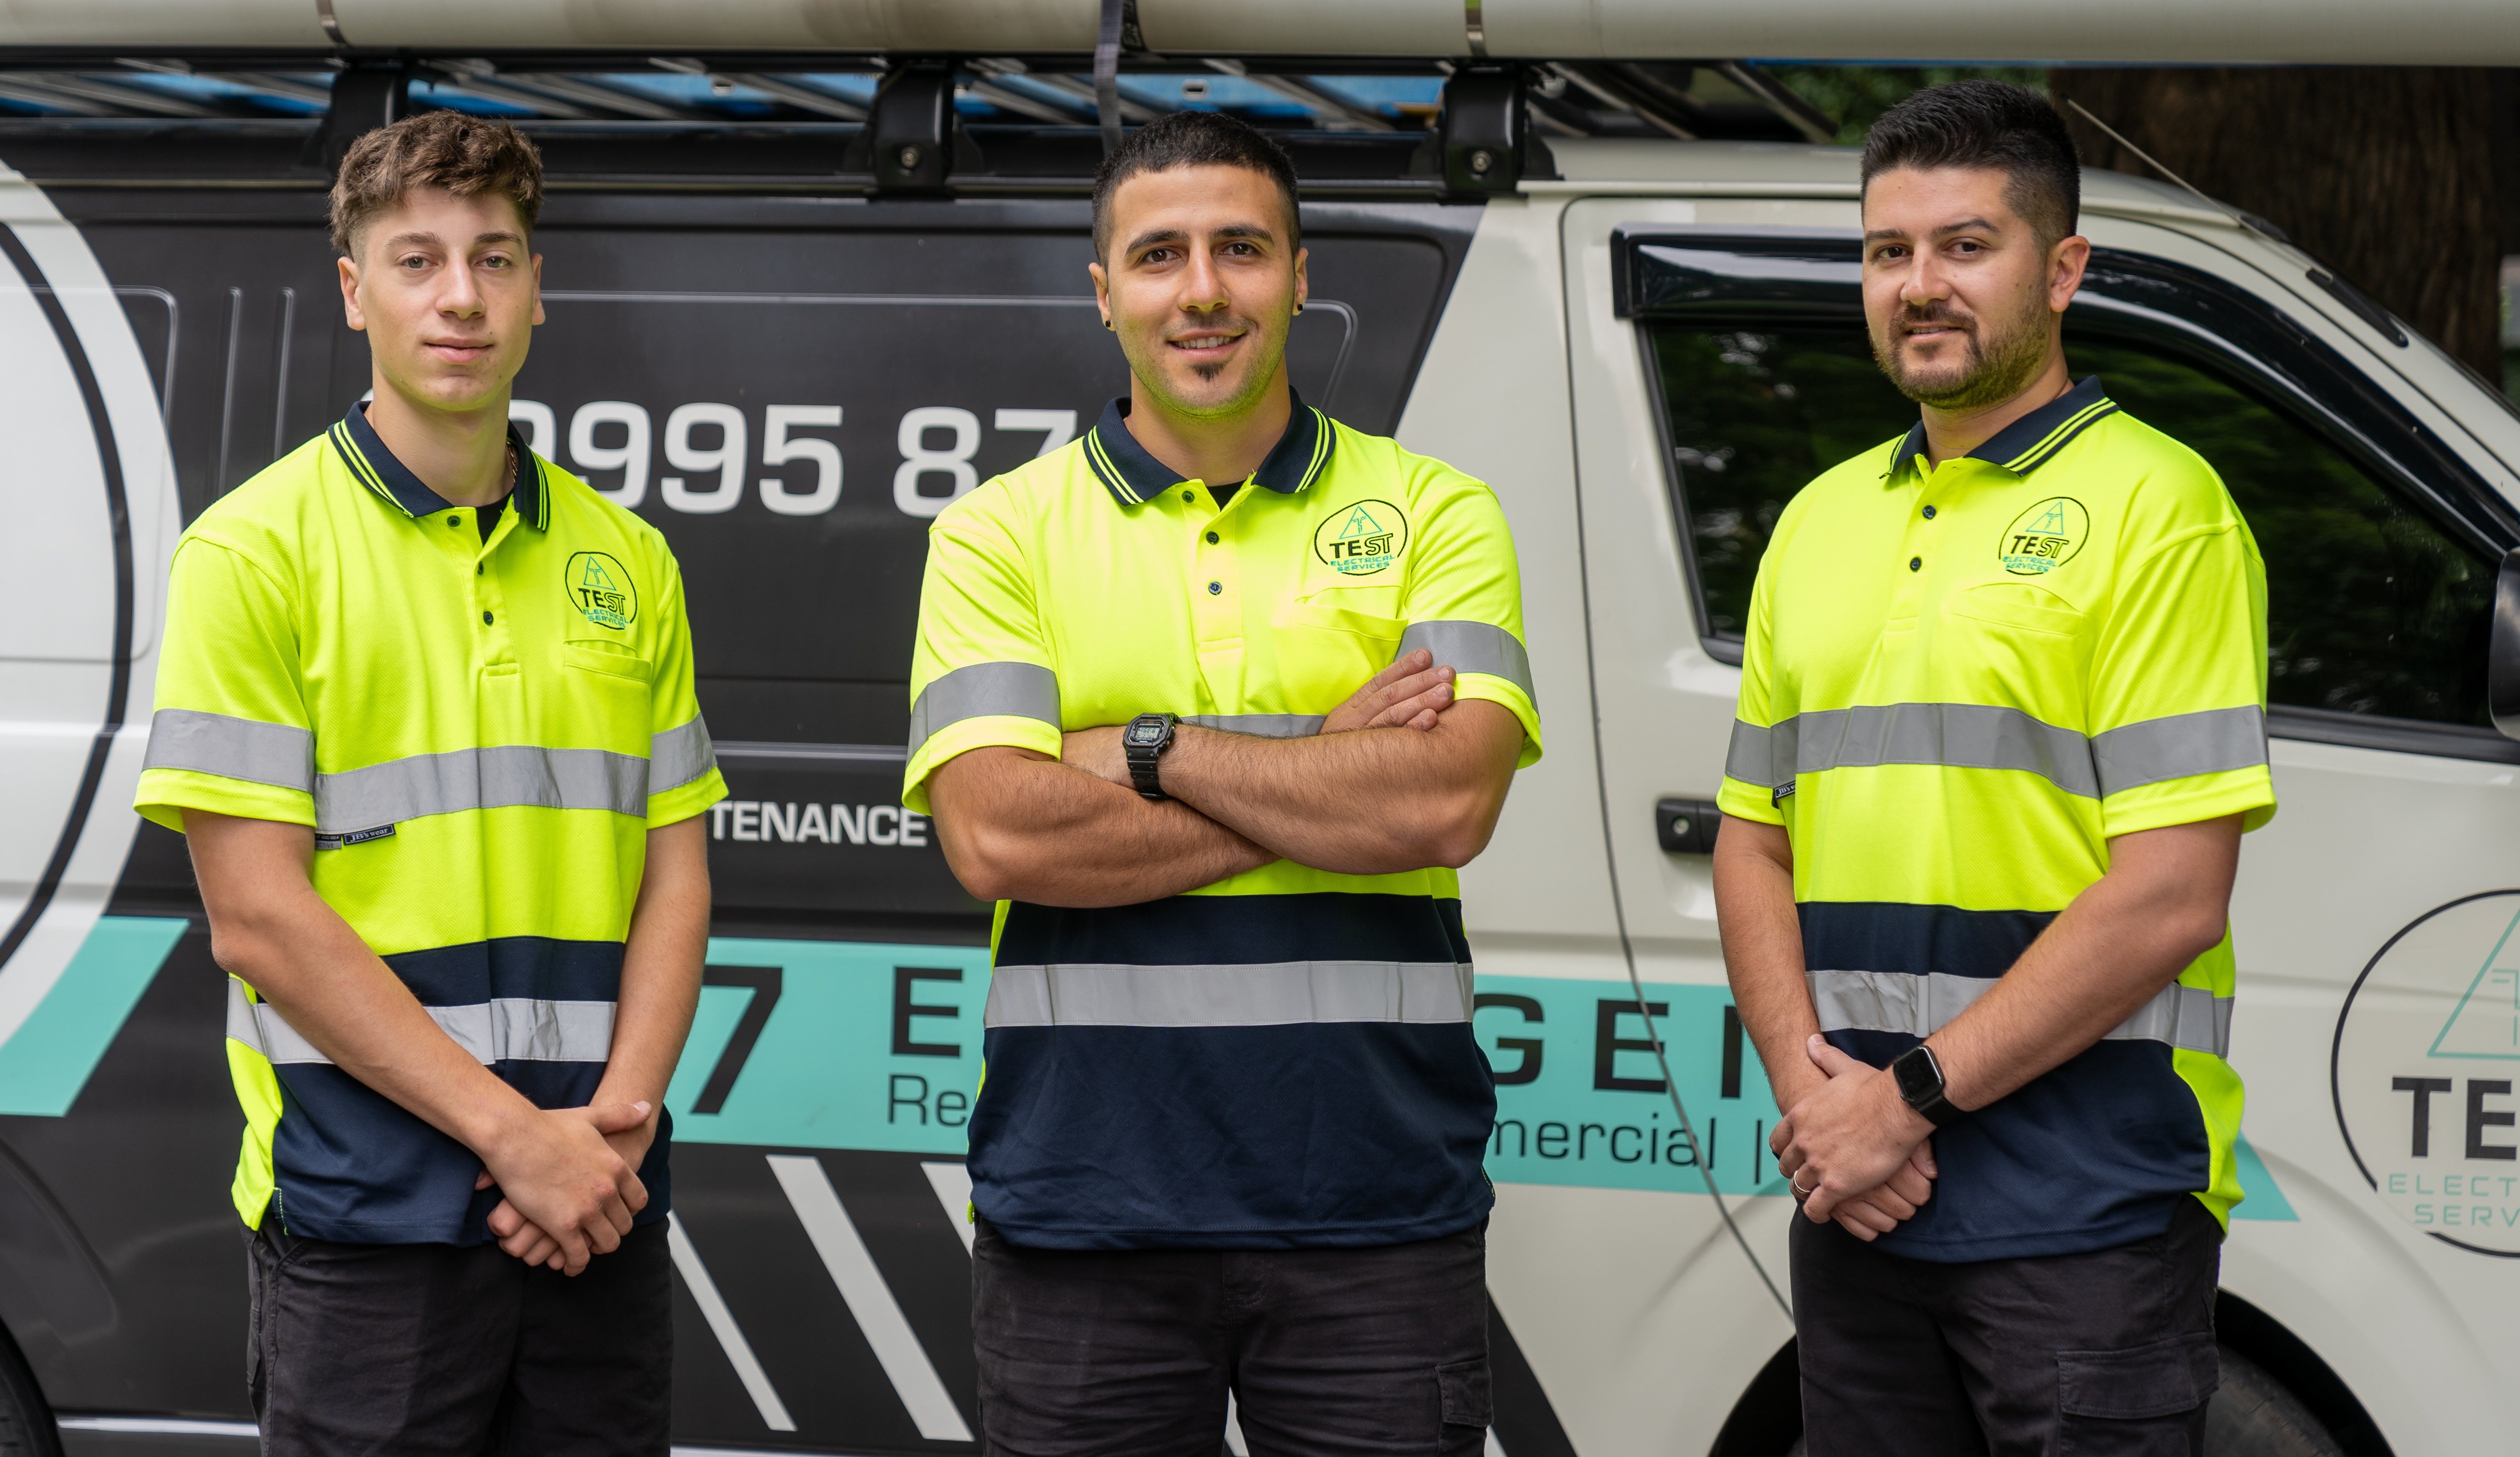 electrician in melbourne